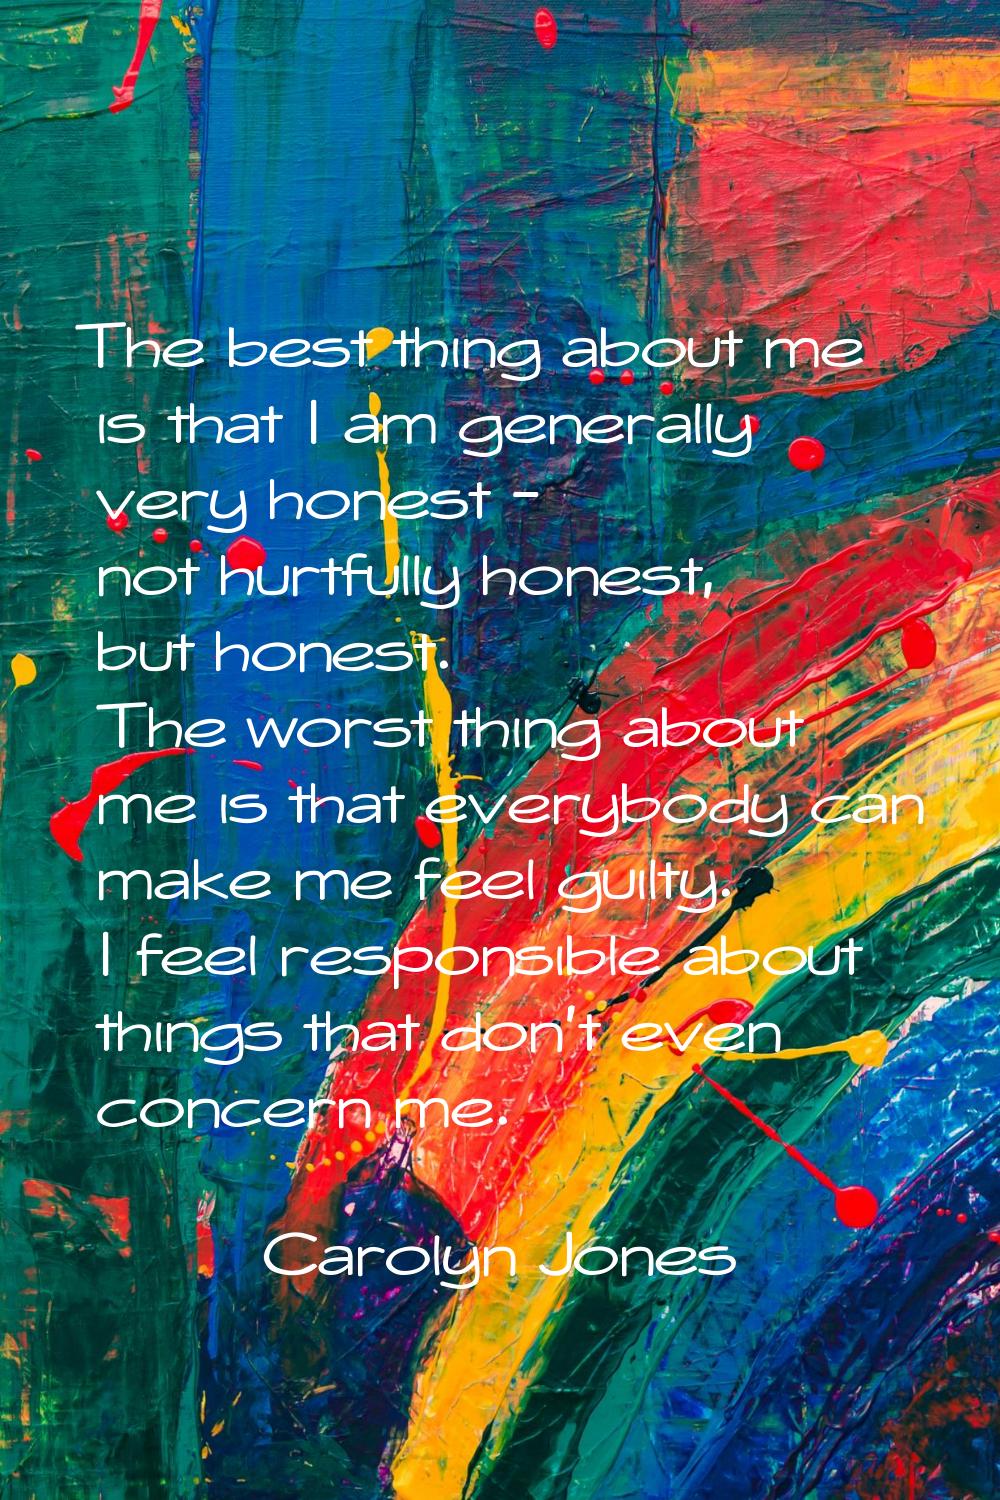 The best thing about me is that I am generally very honest - not hurtfully honest, but honest. The 